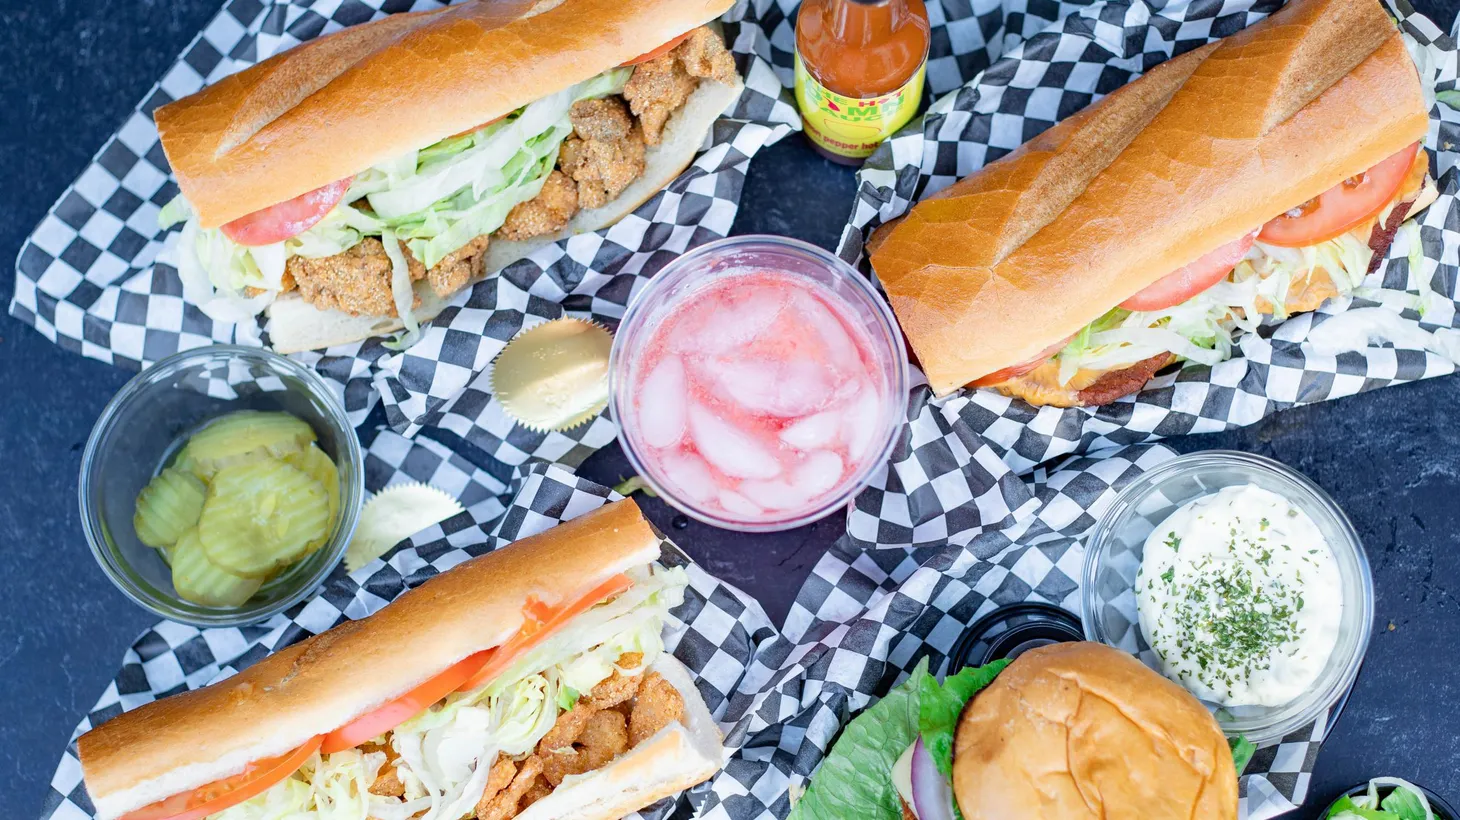 Assorted po’ boys are just some of the offerings from Angels and Saints PoBoys.